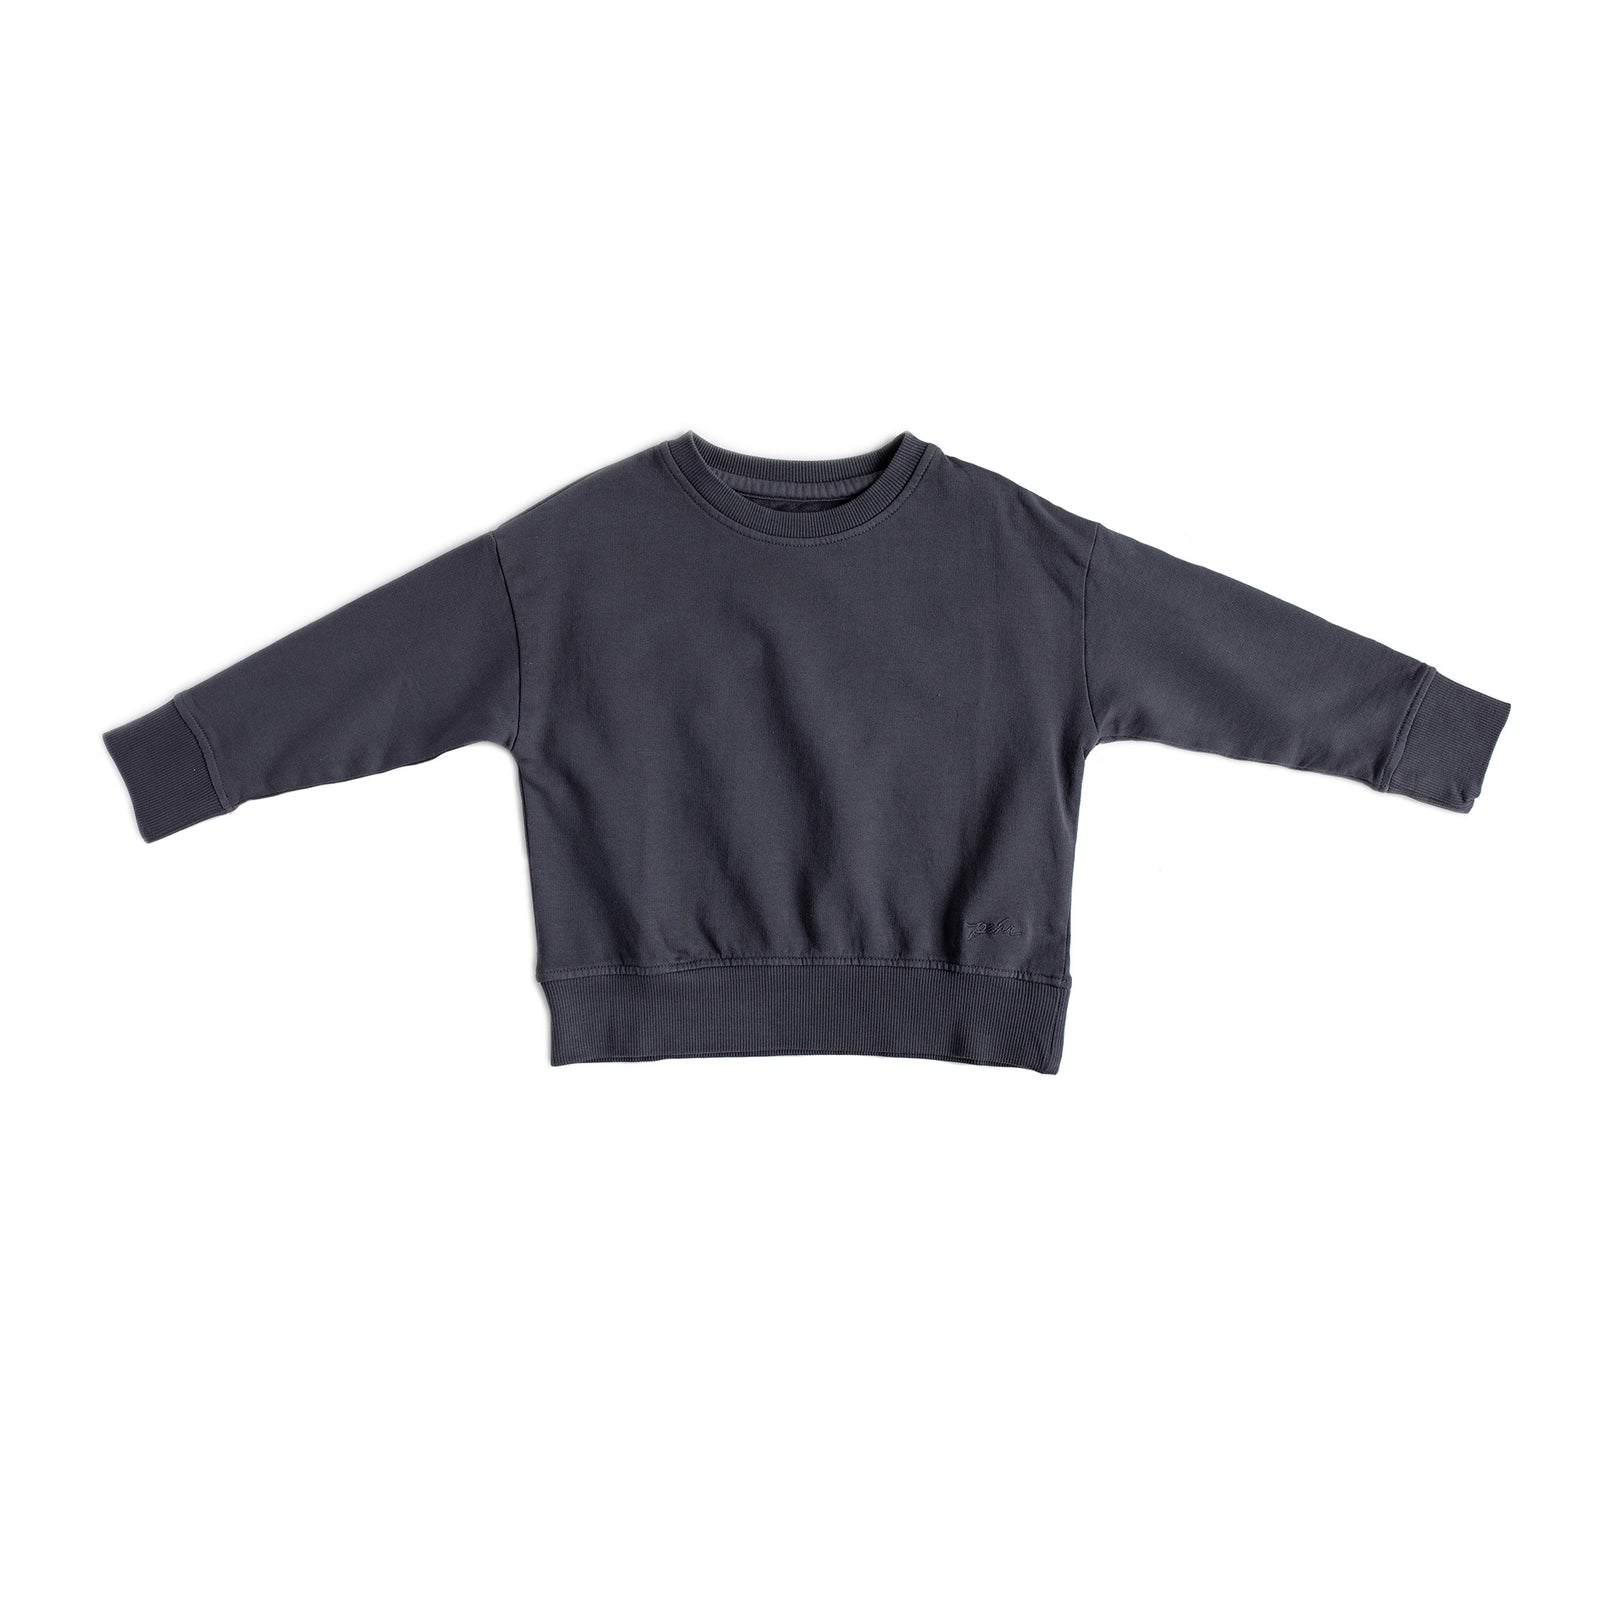 French Terry Sweatshirt Top Pehr Canada Ink Blue 18 - 24 mos. 